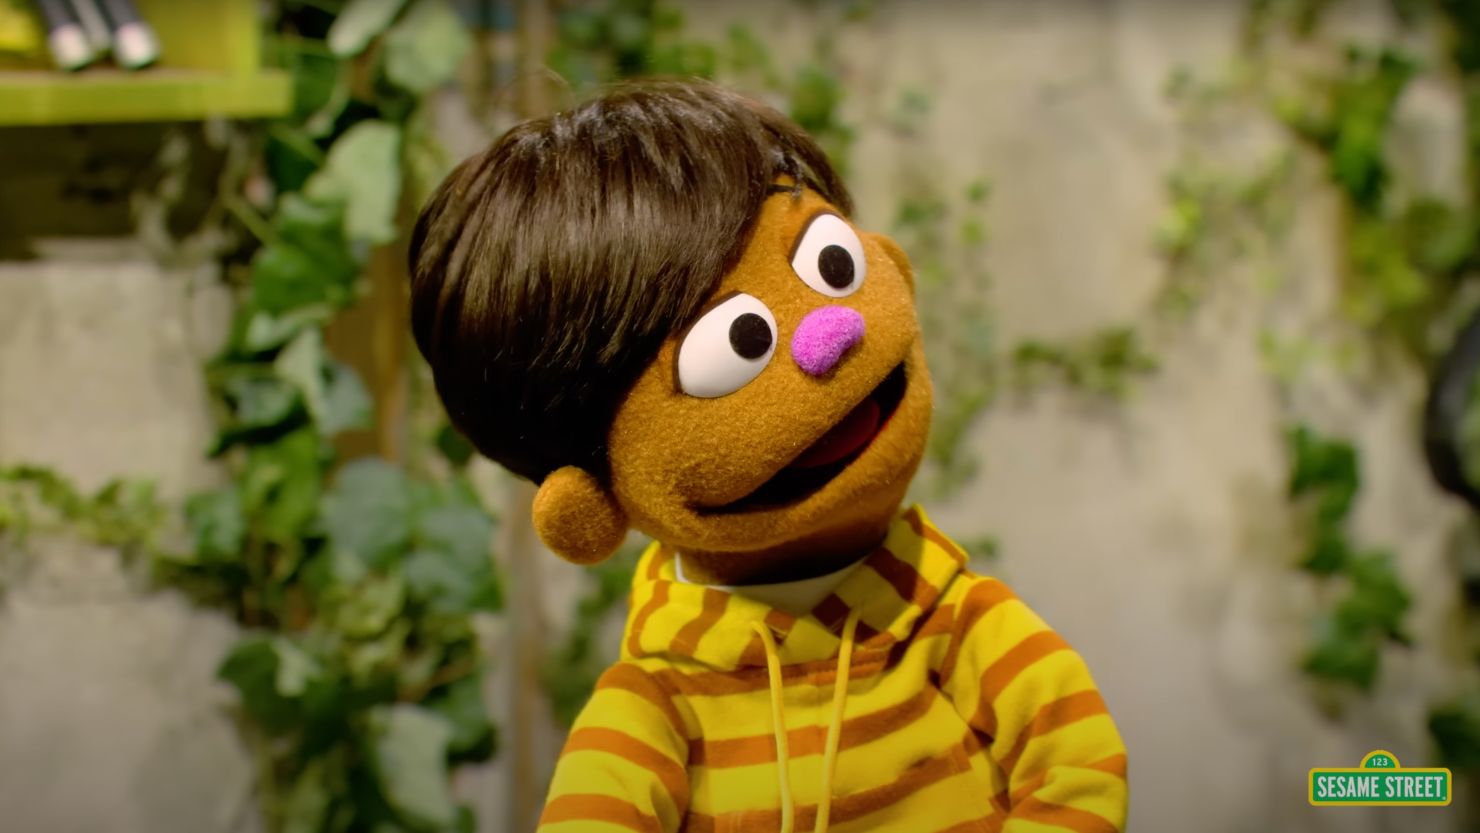 TJ, a new Filipino muppet, recently made his debut on "Sesame Street."